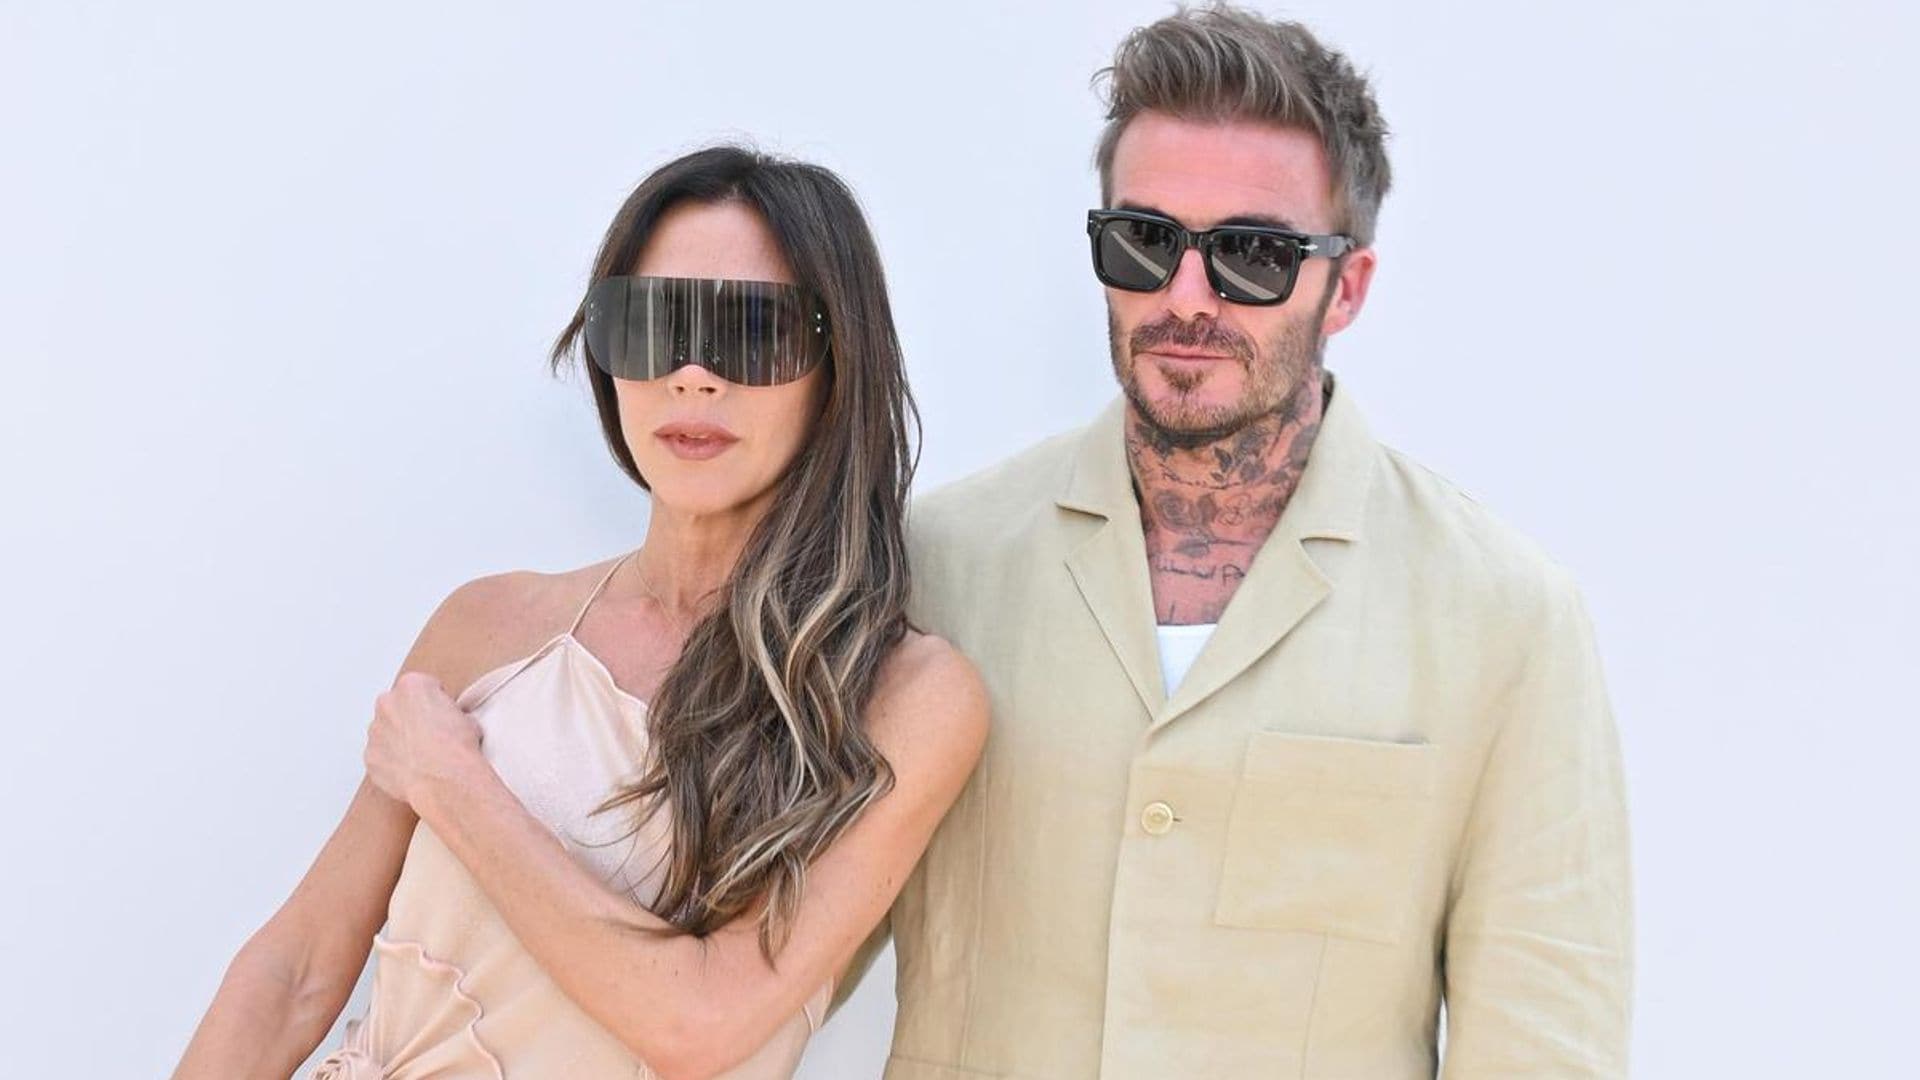 Victoria Beckham pokes fun at David Beckham, who had a near-tumble while welcoming Lionel Messi to Inter Miami